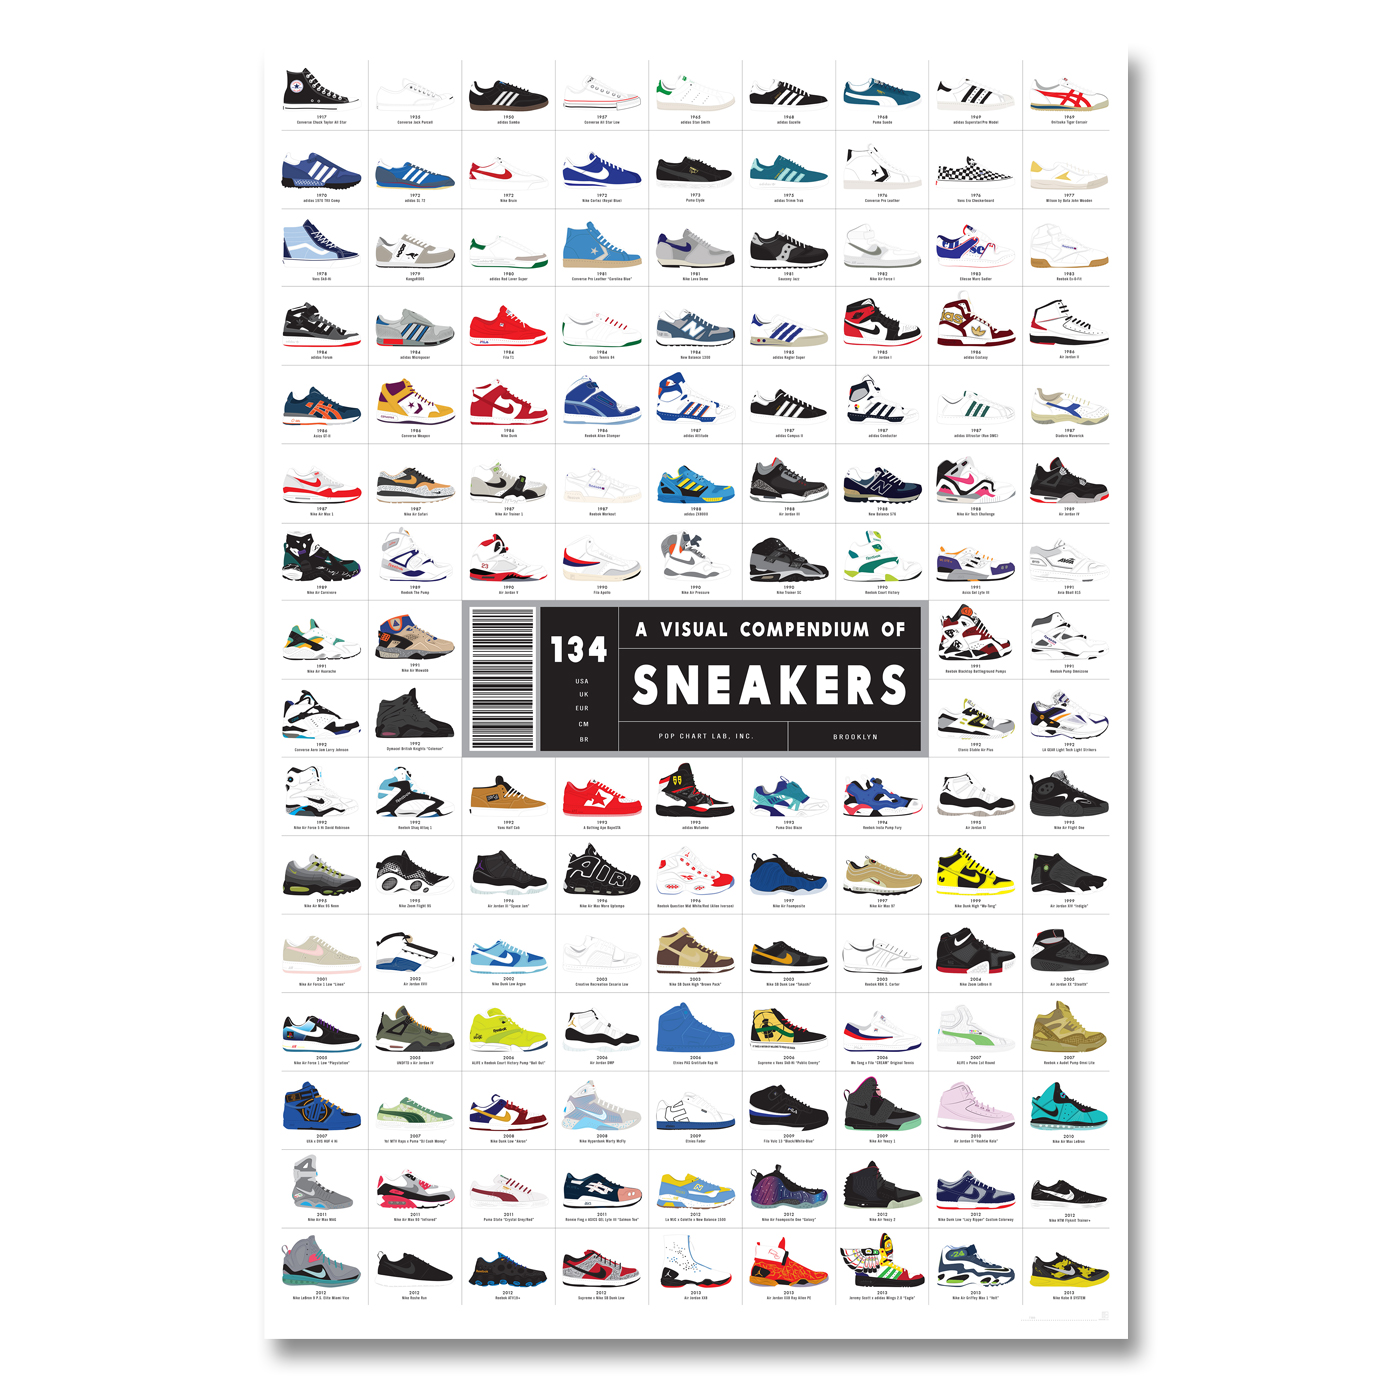 Pop Chart Lab Sneakers